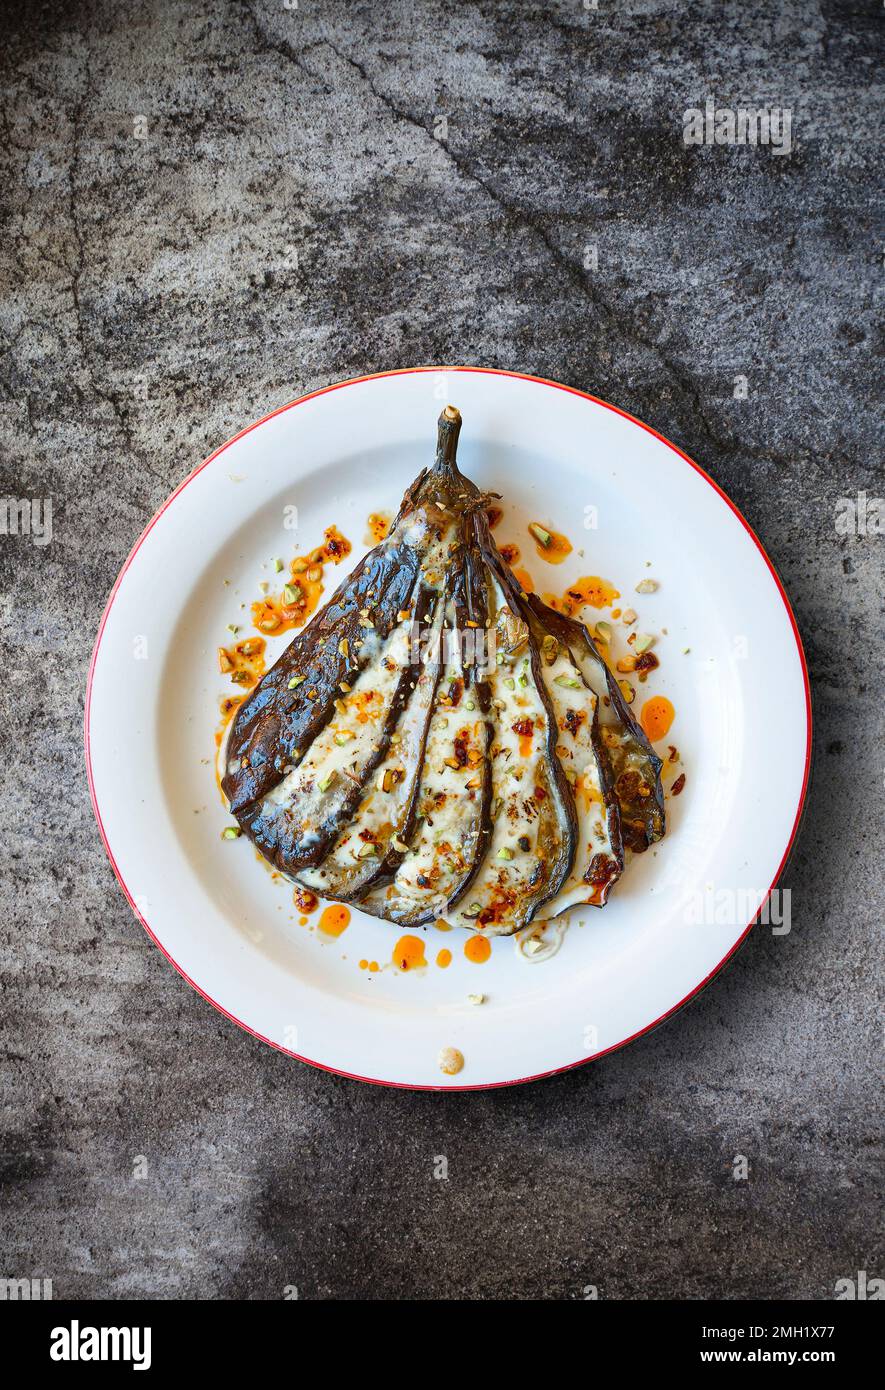 Baked Eggplant, dressed with harissa and pistachio. Stock Photo